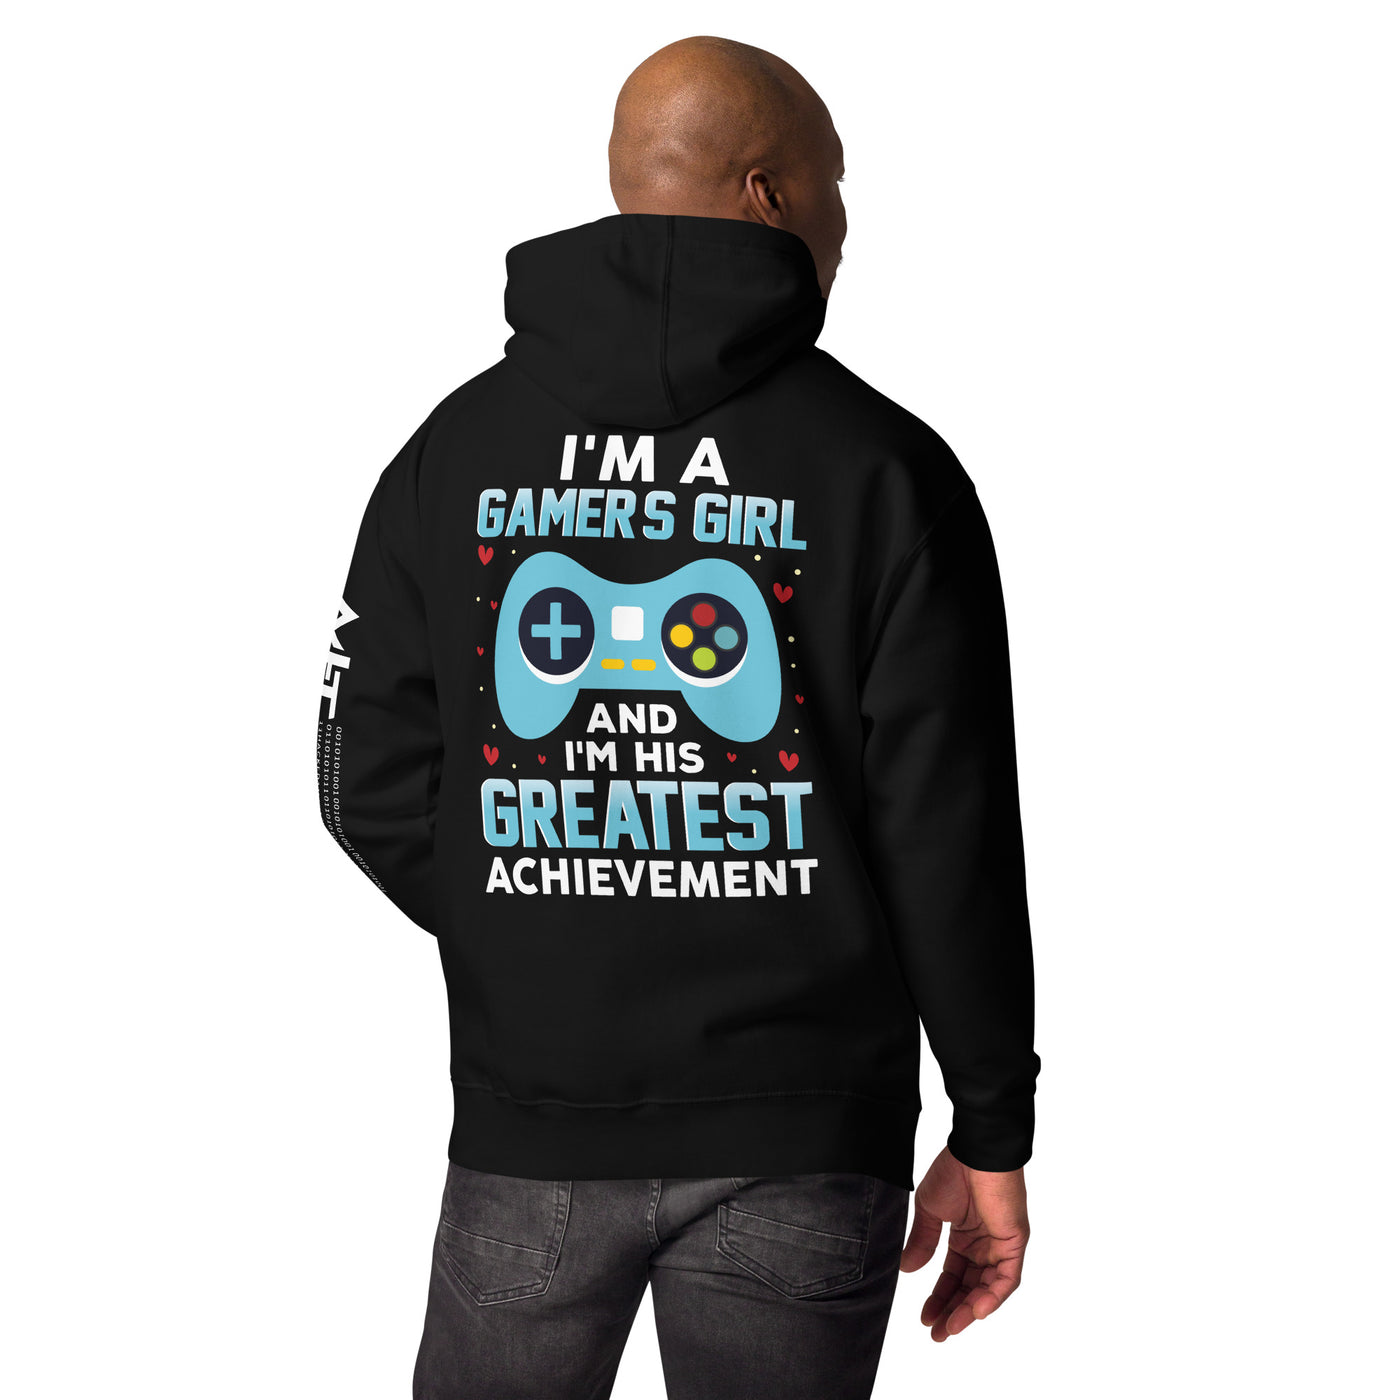 I am a Gamer's Girl, I am his Greatest Achievement (turquoise text ) - Unisex Hoodie ( Back Print )